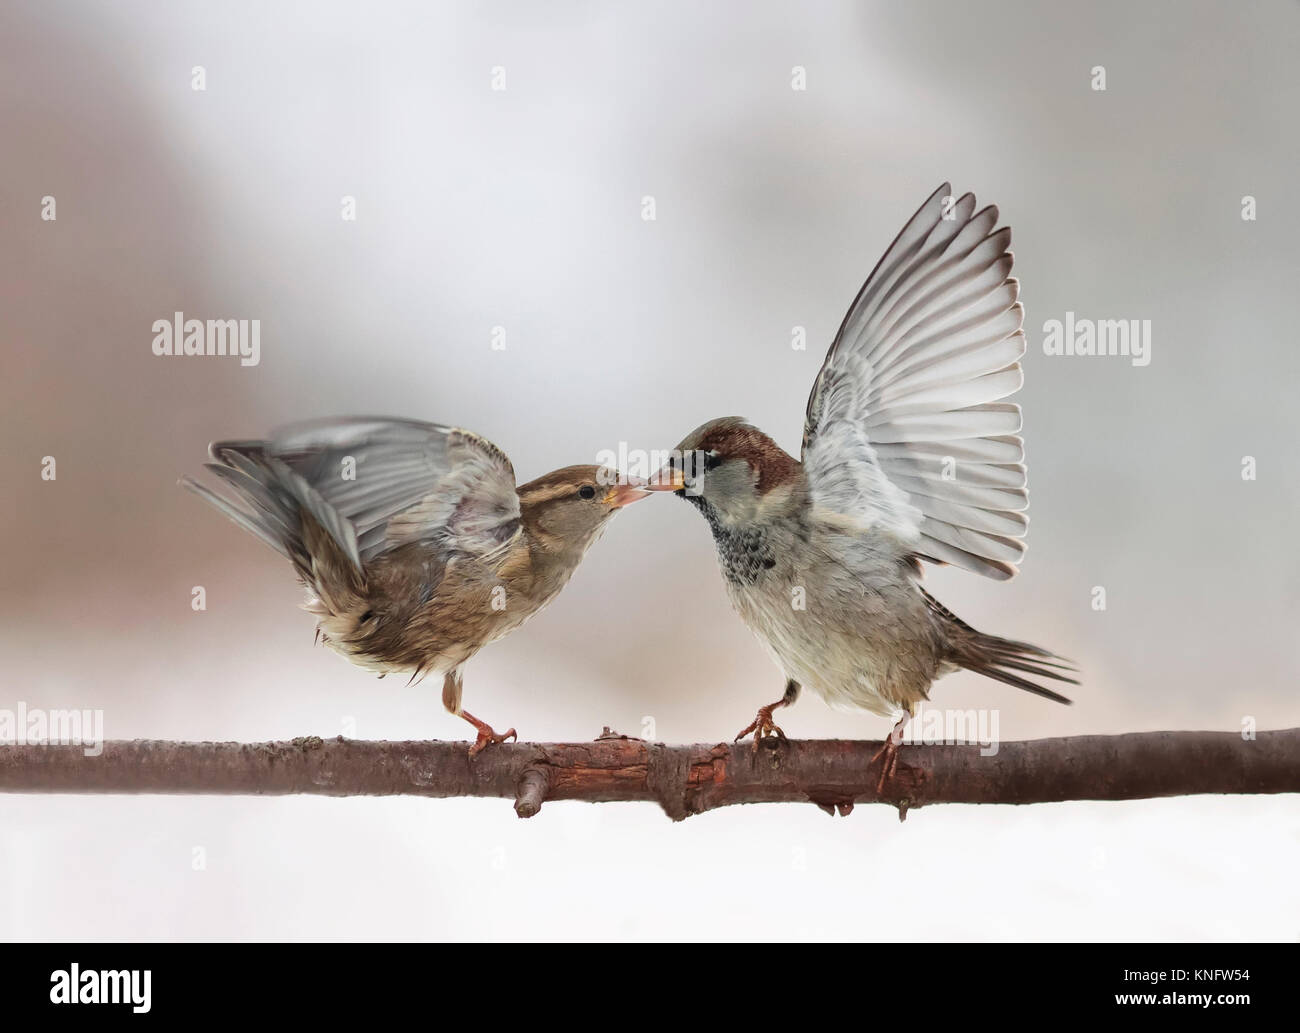 couple of cute little birds sparrows arguing on the branch flapping wings and beaks locked together Stock Photo